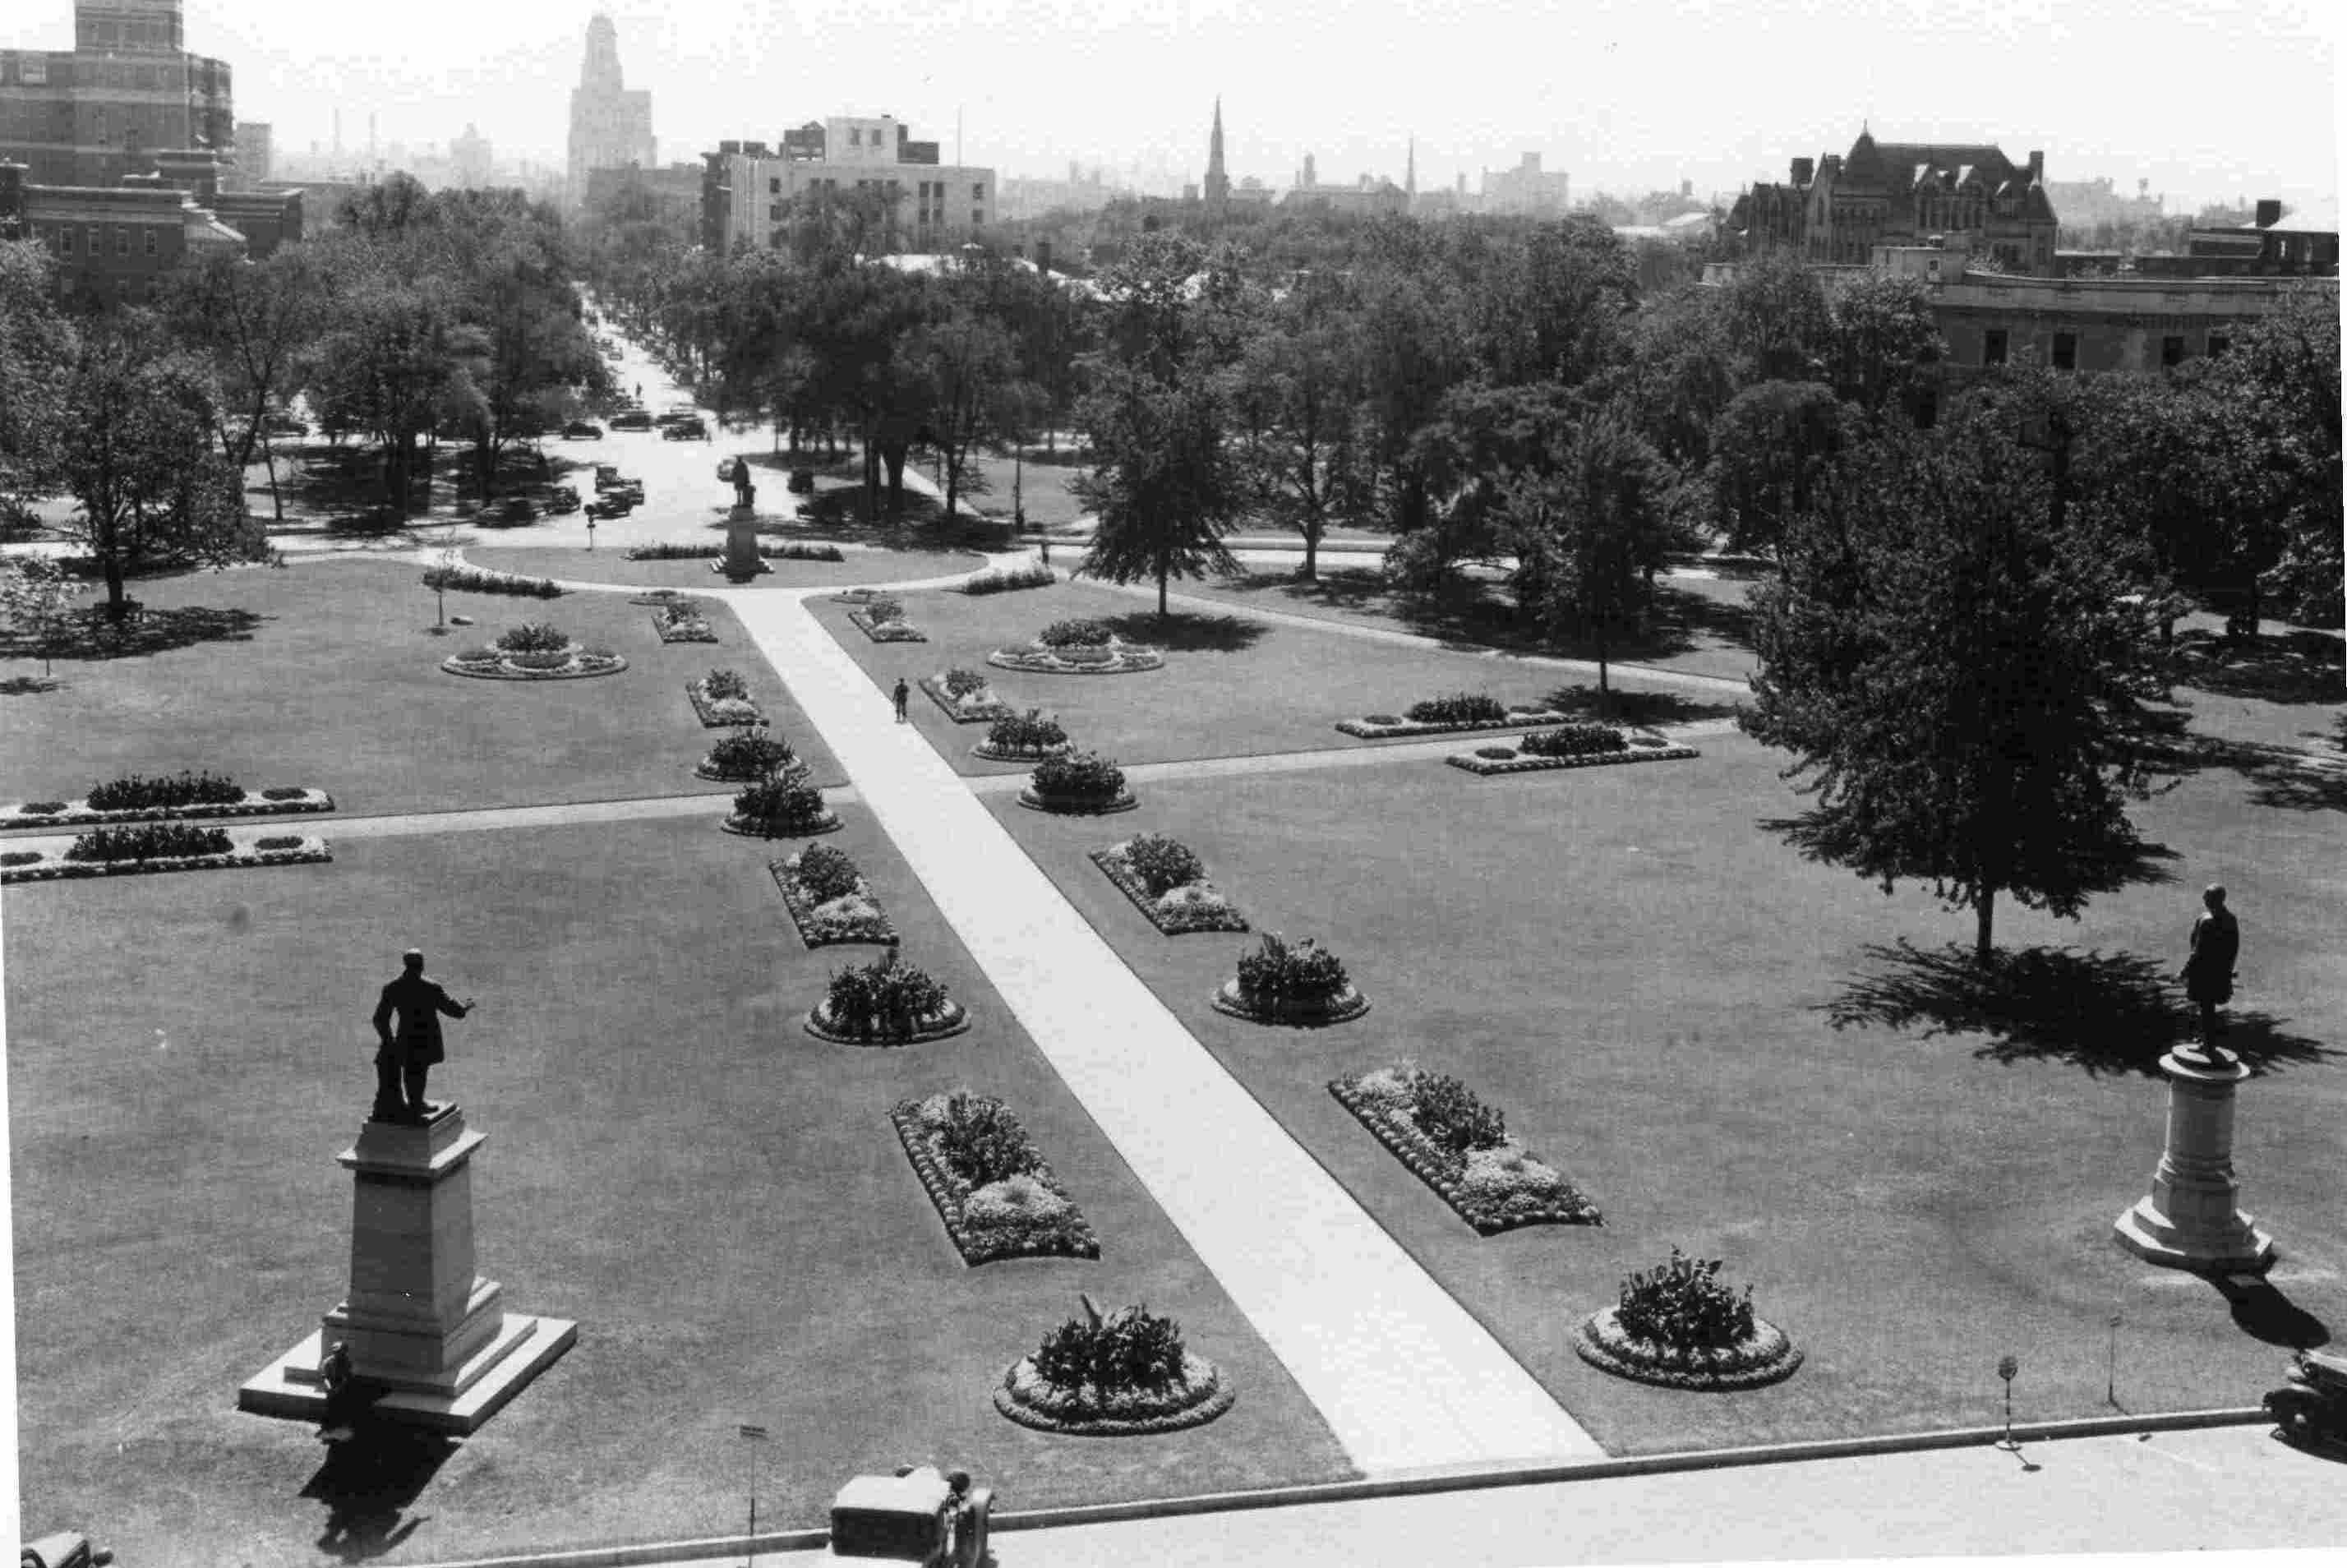 Looking south on the grounds of the Legislative Building, 1930s.